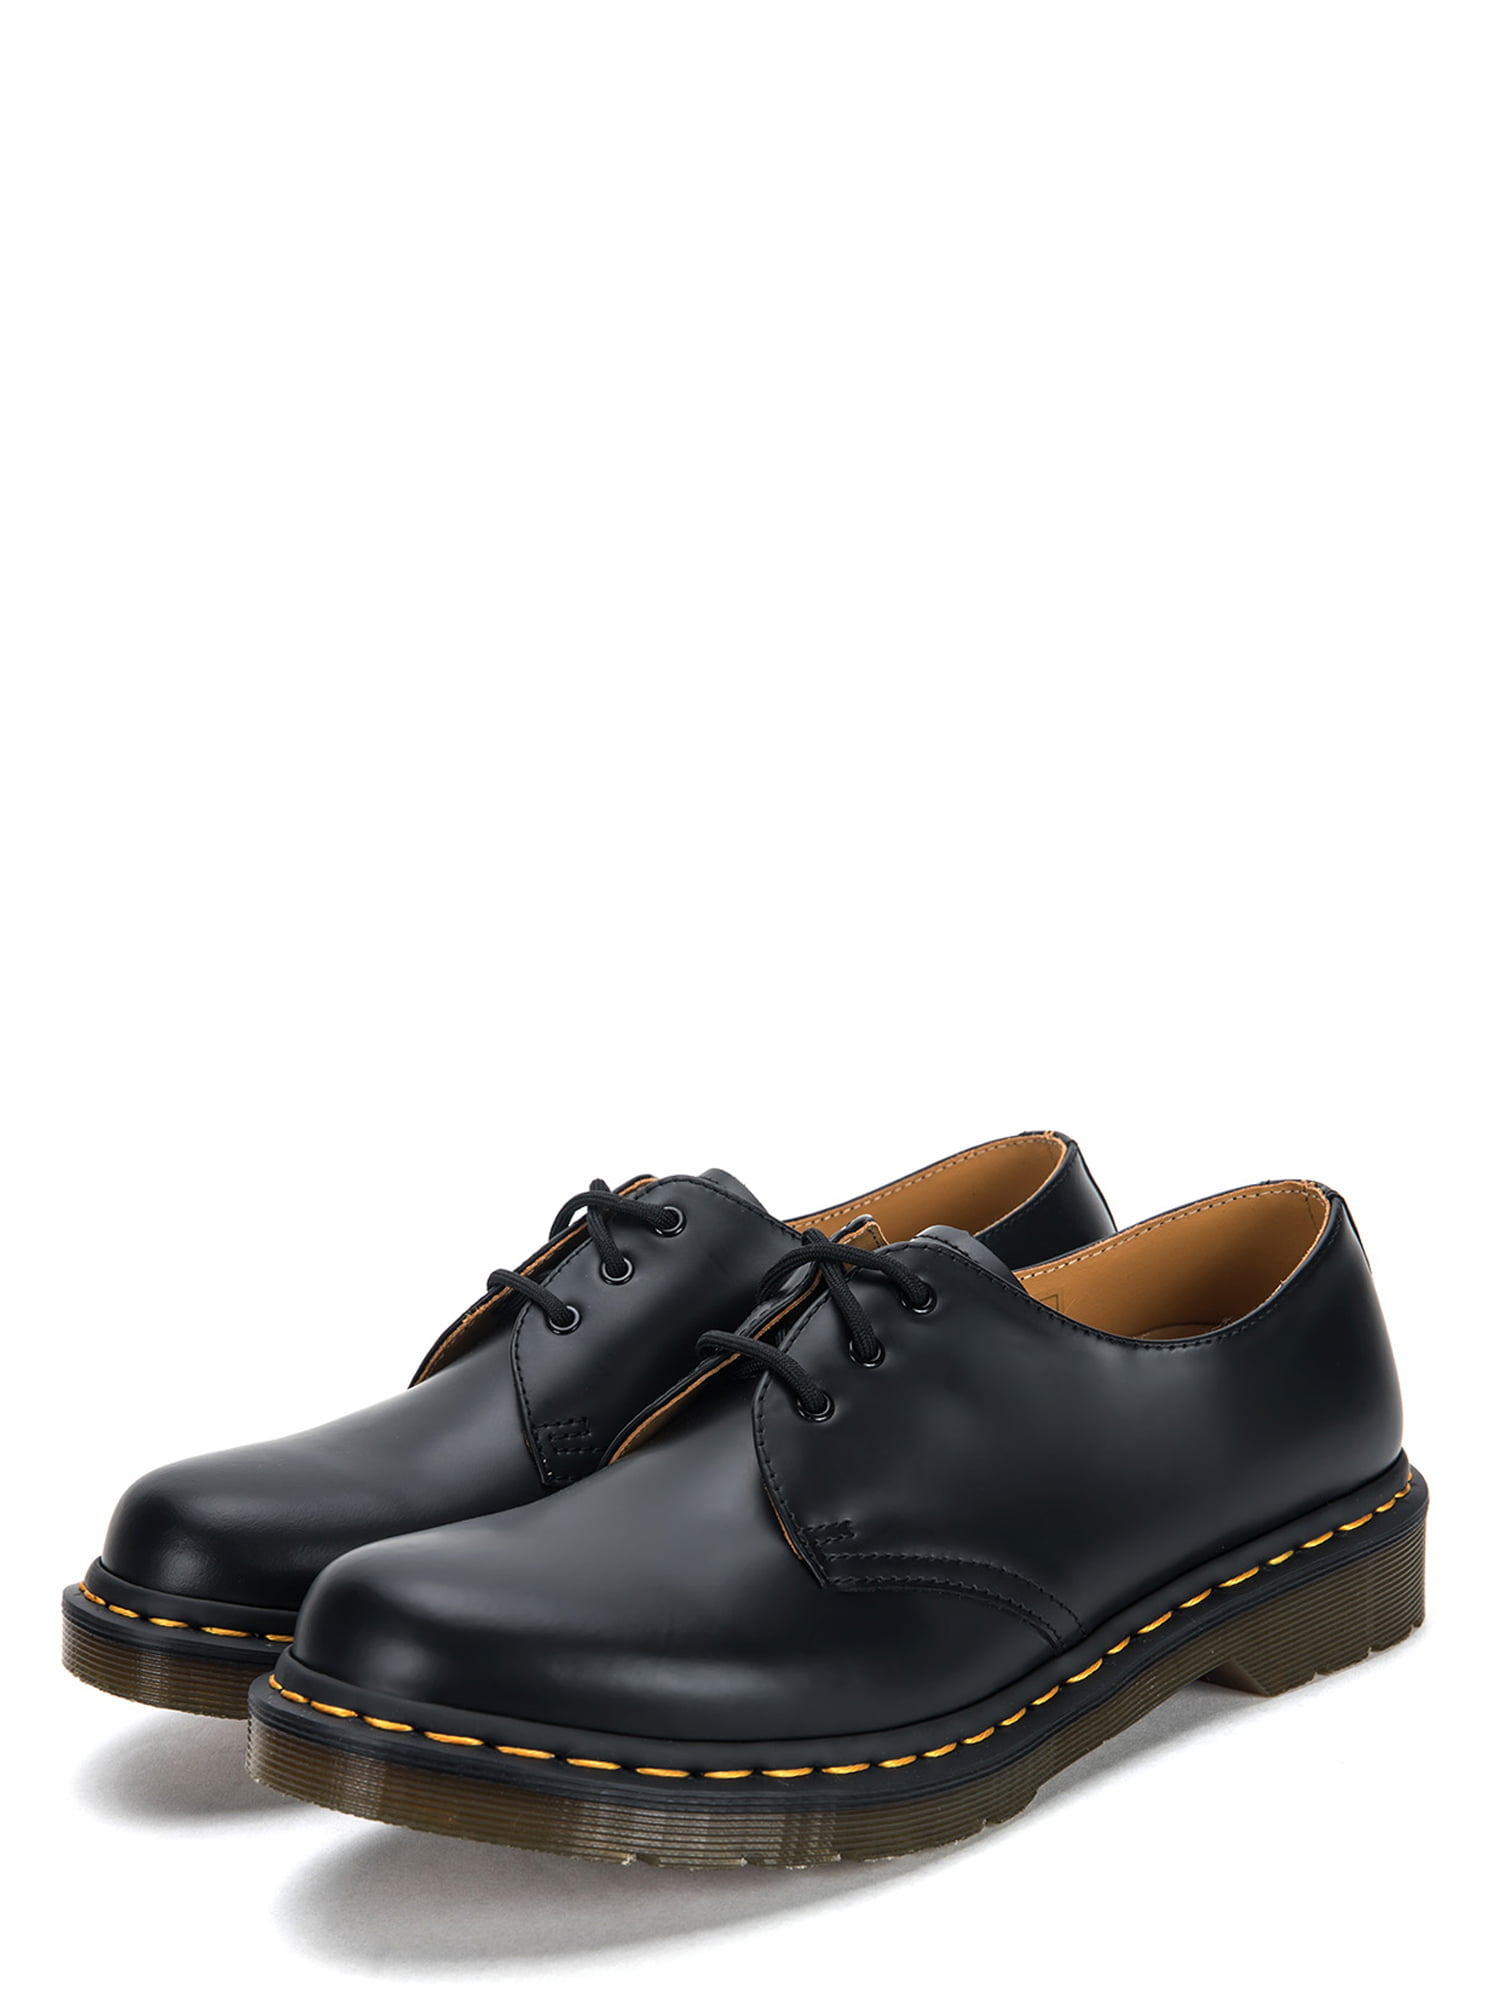 doctor marten shoes for womens